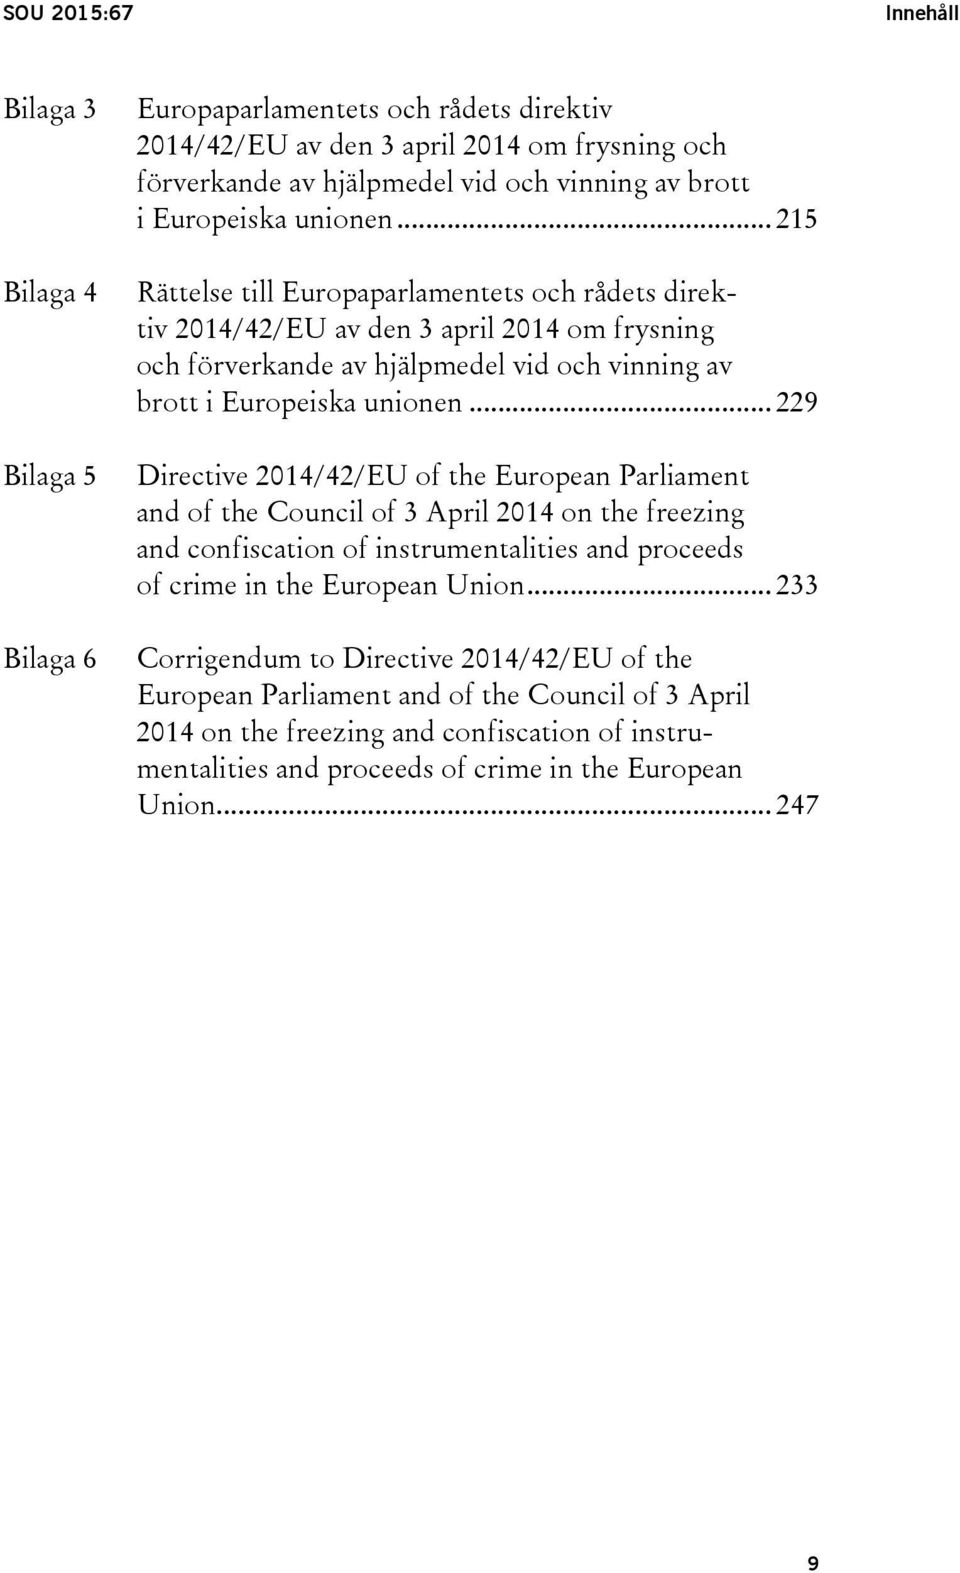 .. 229 Directive 2014/42/EU of the European Parliament and of the Council of 3 April 2014 on the freezing and confiscation of instrumentalities and proceeds of crime in the European Union.